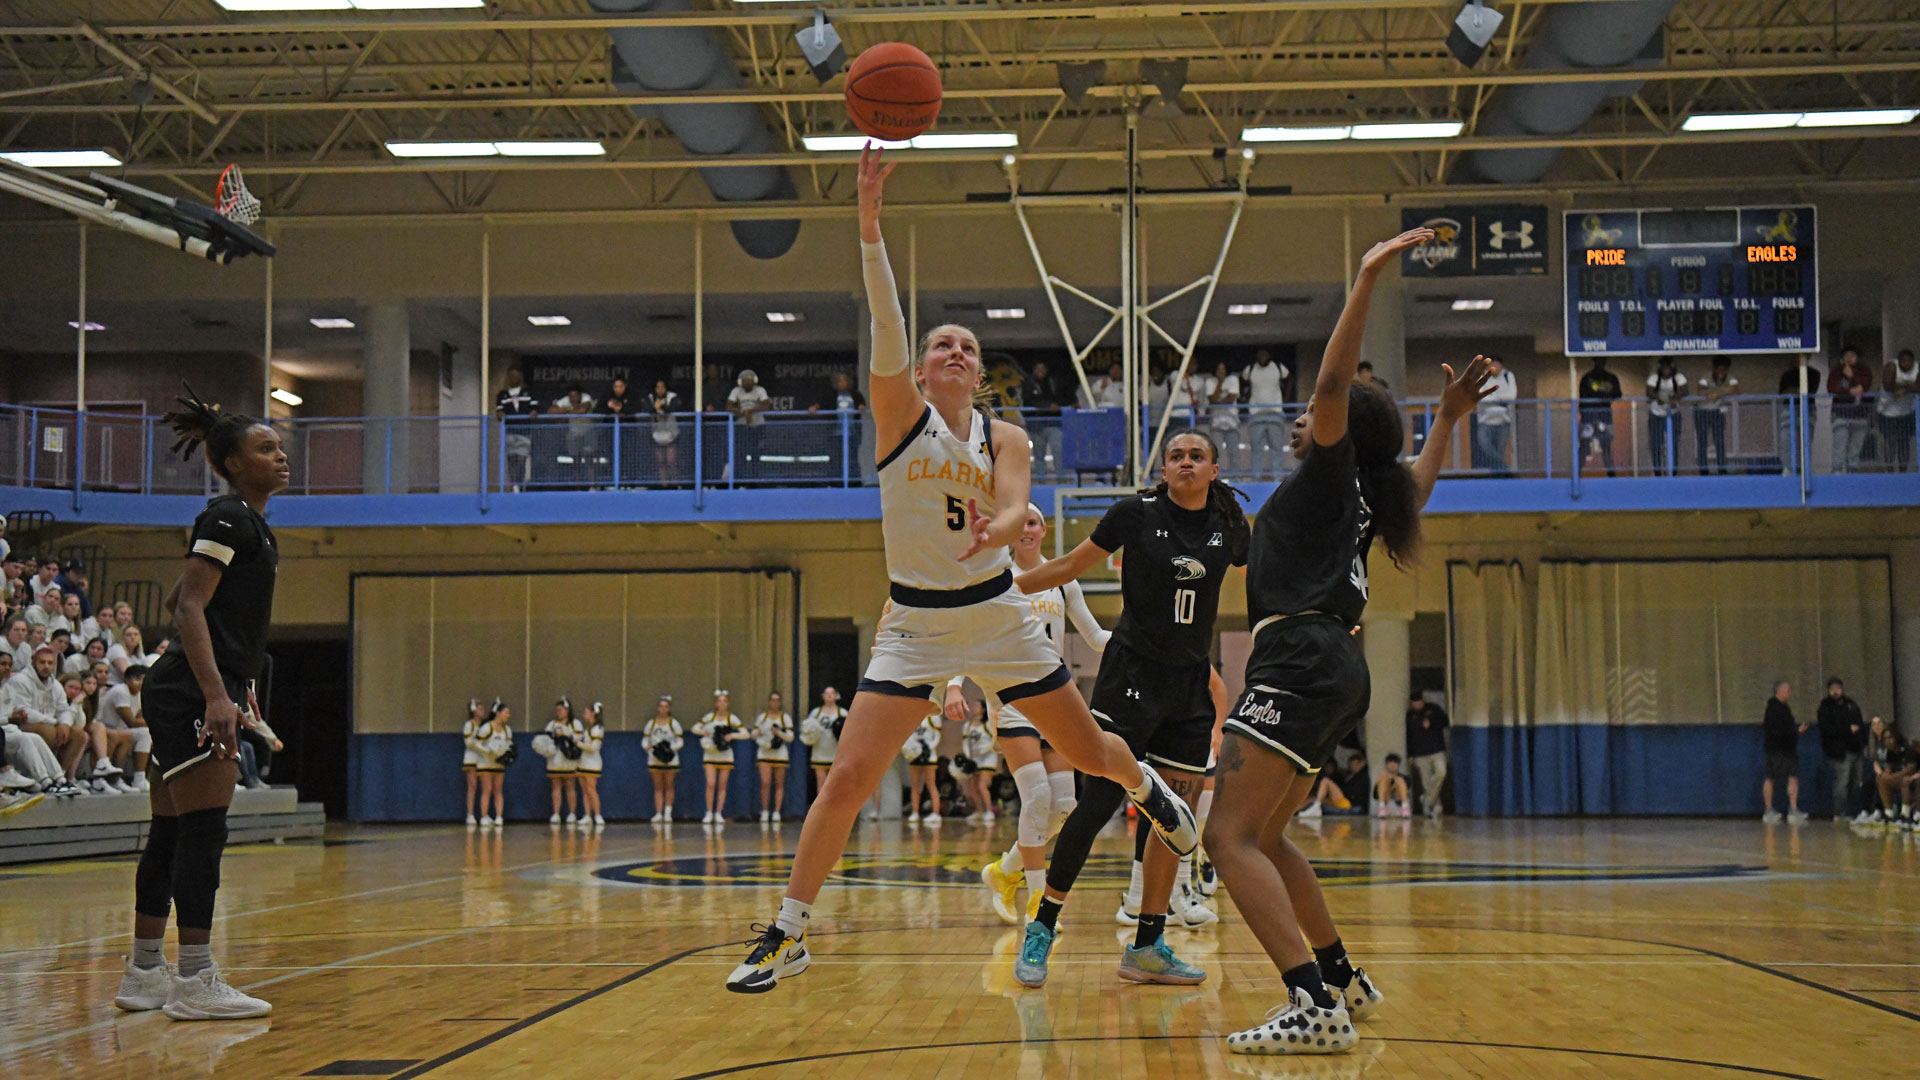 Pride defeat 8th-ranked Central Methodist 101-74